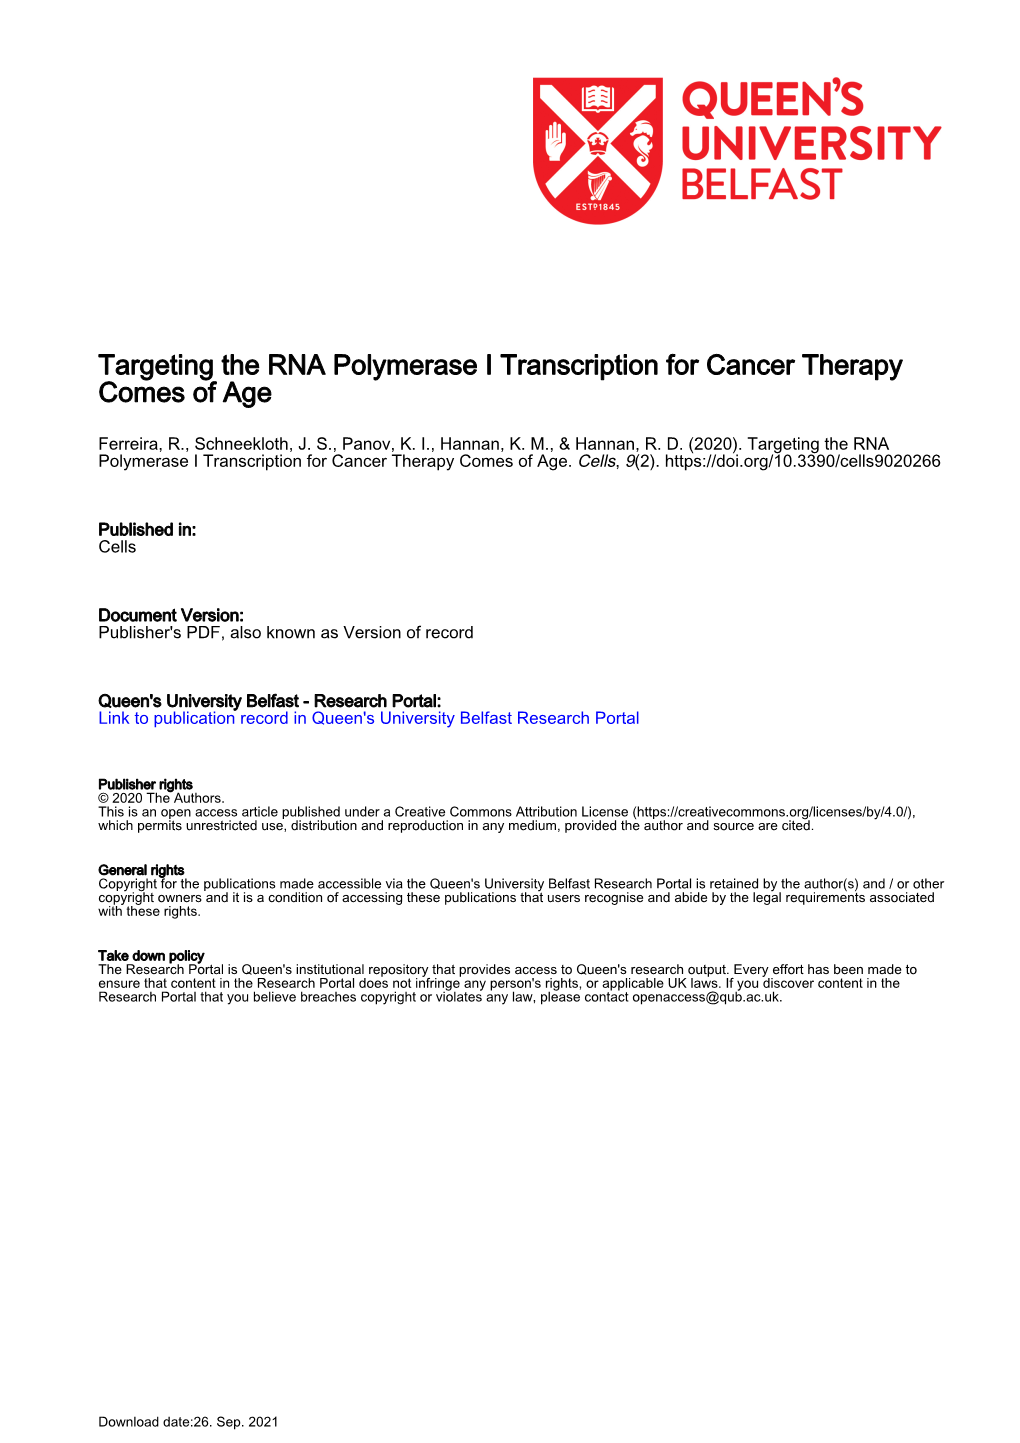 Targeting the RNA Polymerase I Transcription for Cancer Therapy Comes of Age